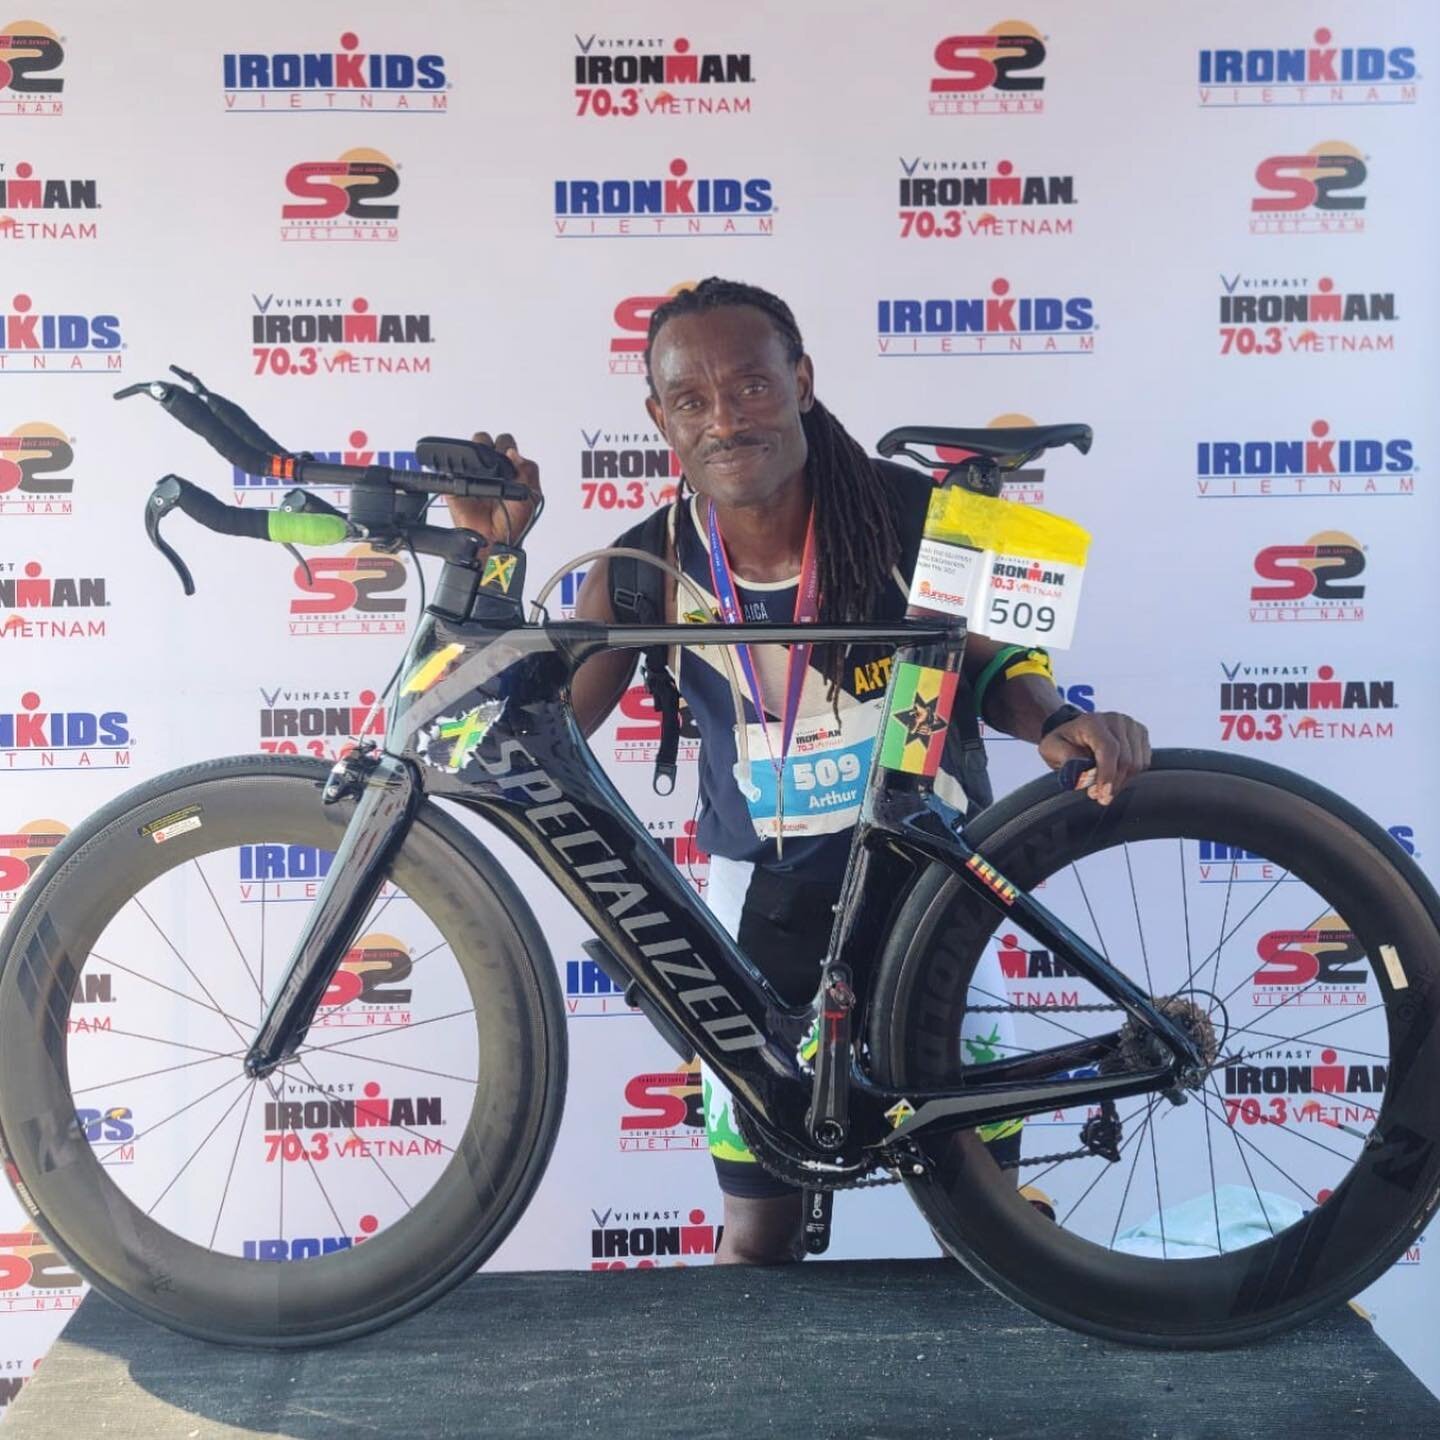 Congratulations to Arthur &ldquo;Dread&rdquo; Vendryes who brought the Jamaican🇯🇲heat to the Ironman 70.3 in Vietnam! 🇻🇳 A wetsuit-less ocean swim &amp; a ton of heat and humidity for the rest of the race led to a challenging but awesome day!👏

